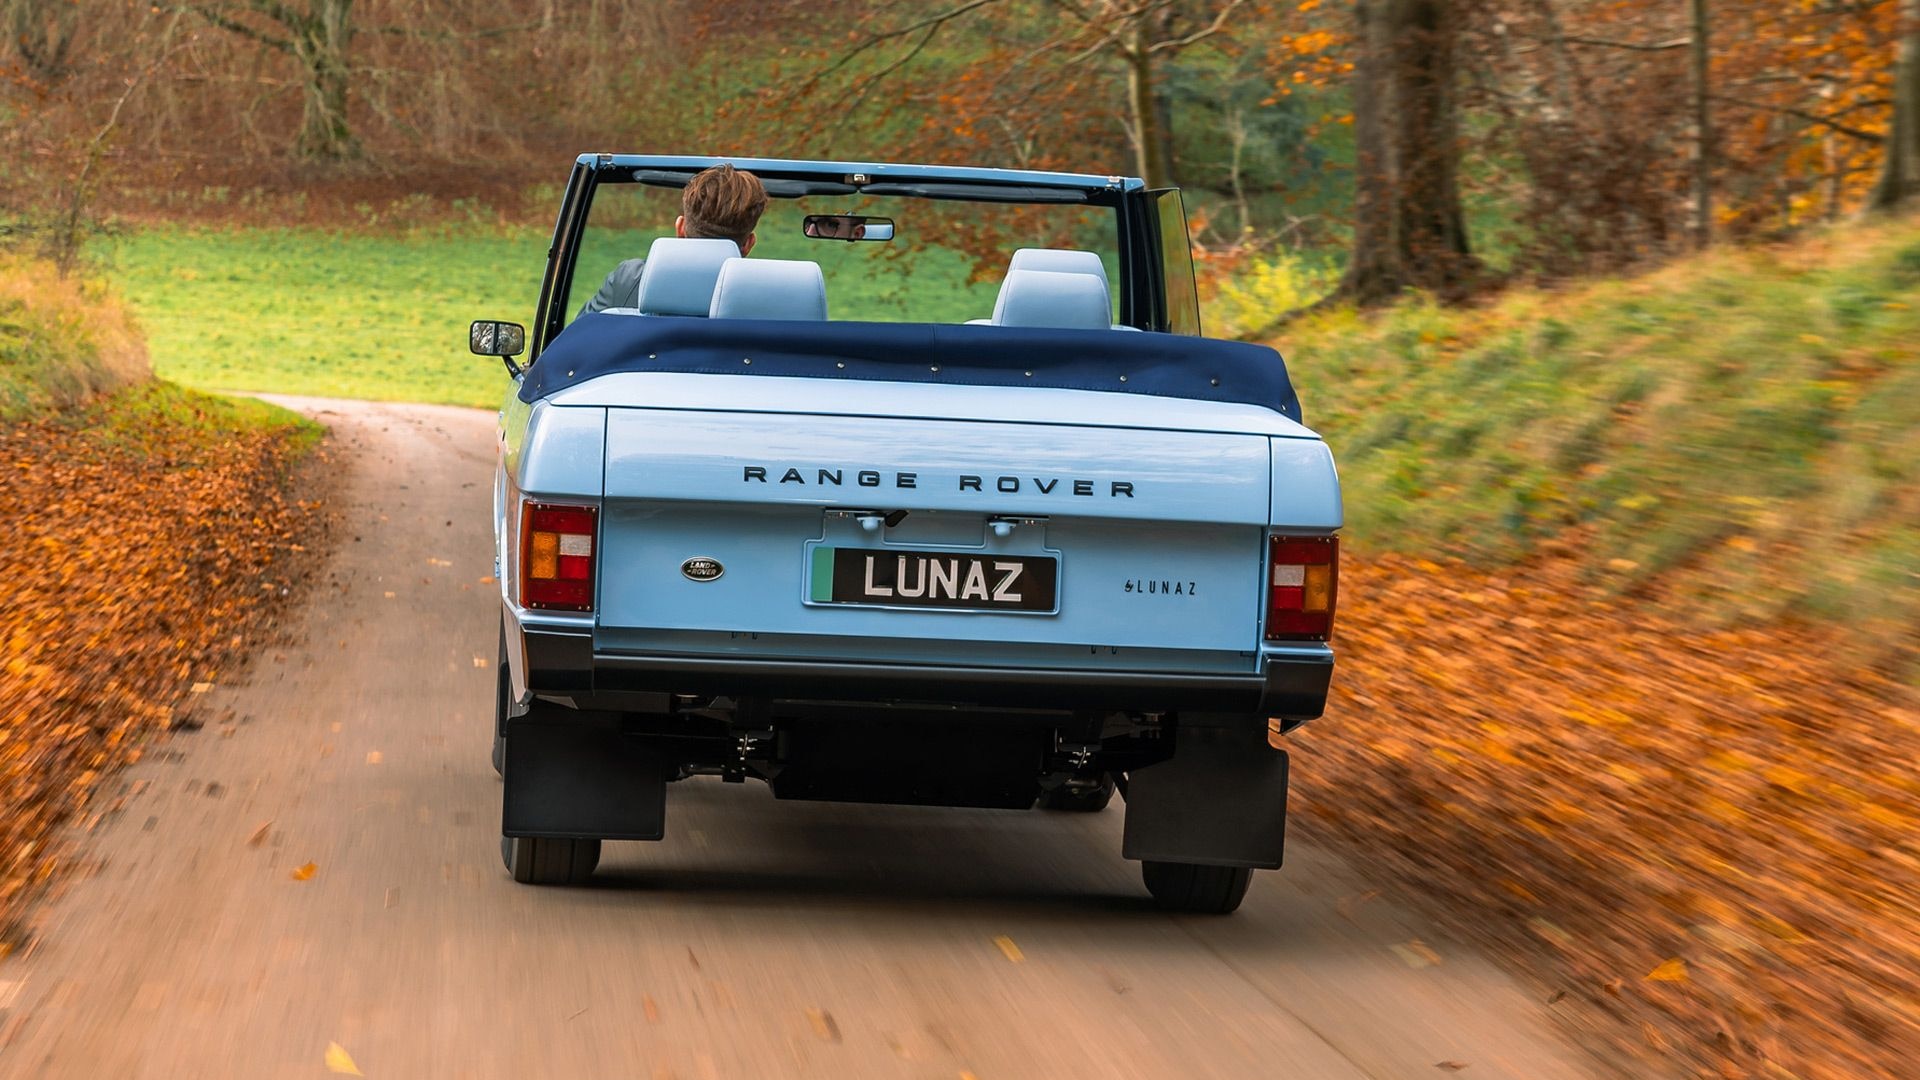 1983 Land Rover Range Rover convertible with EV conversion by Lunaz